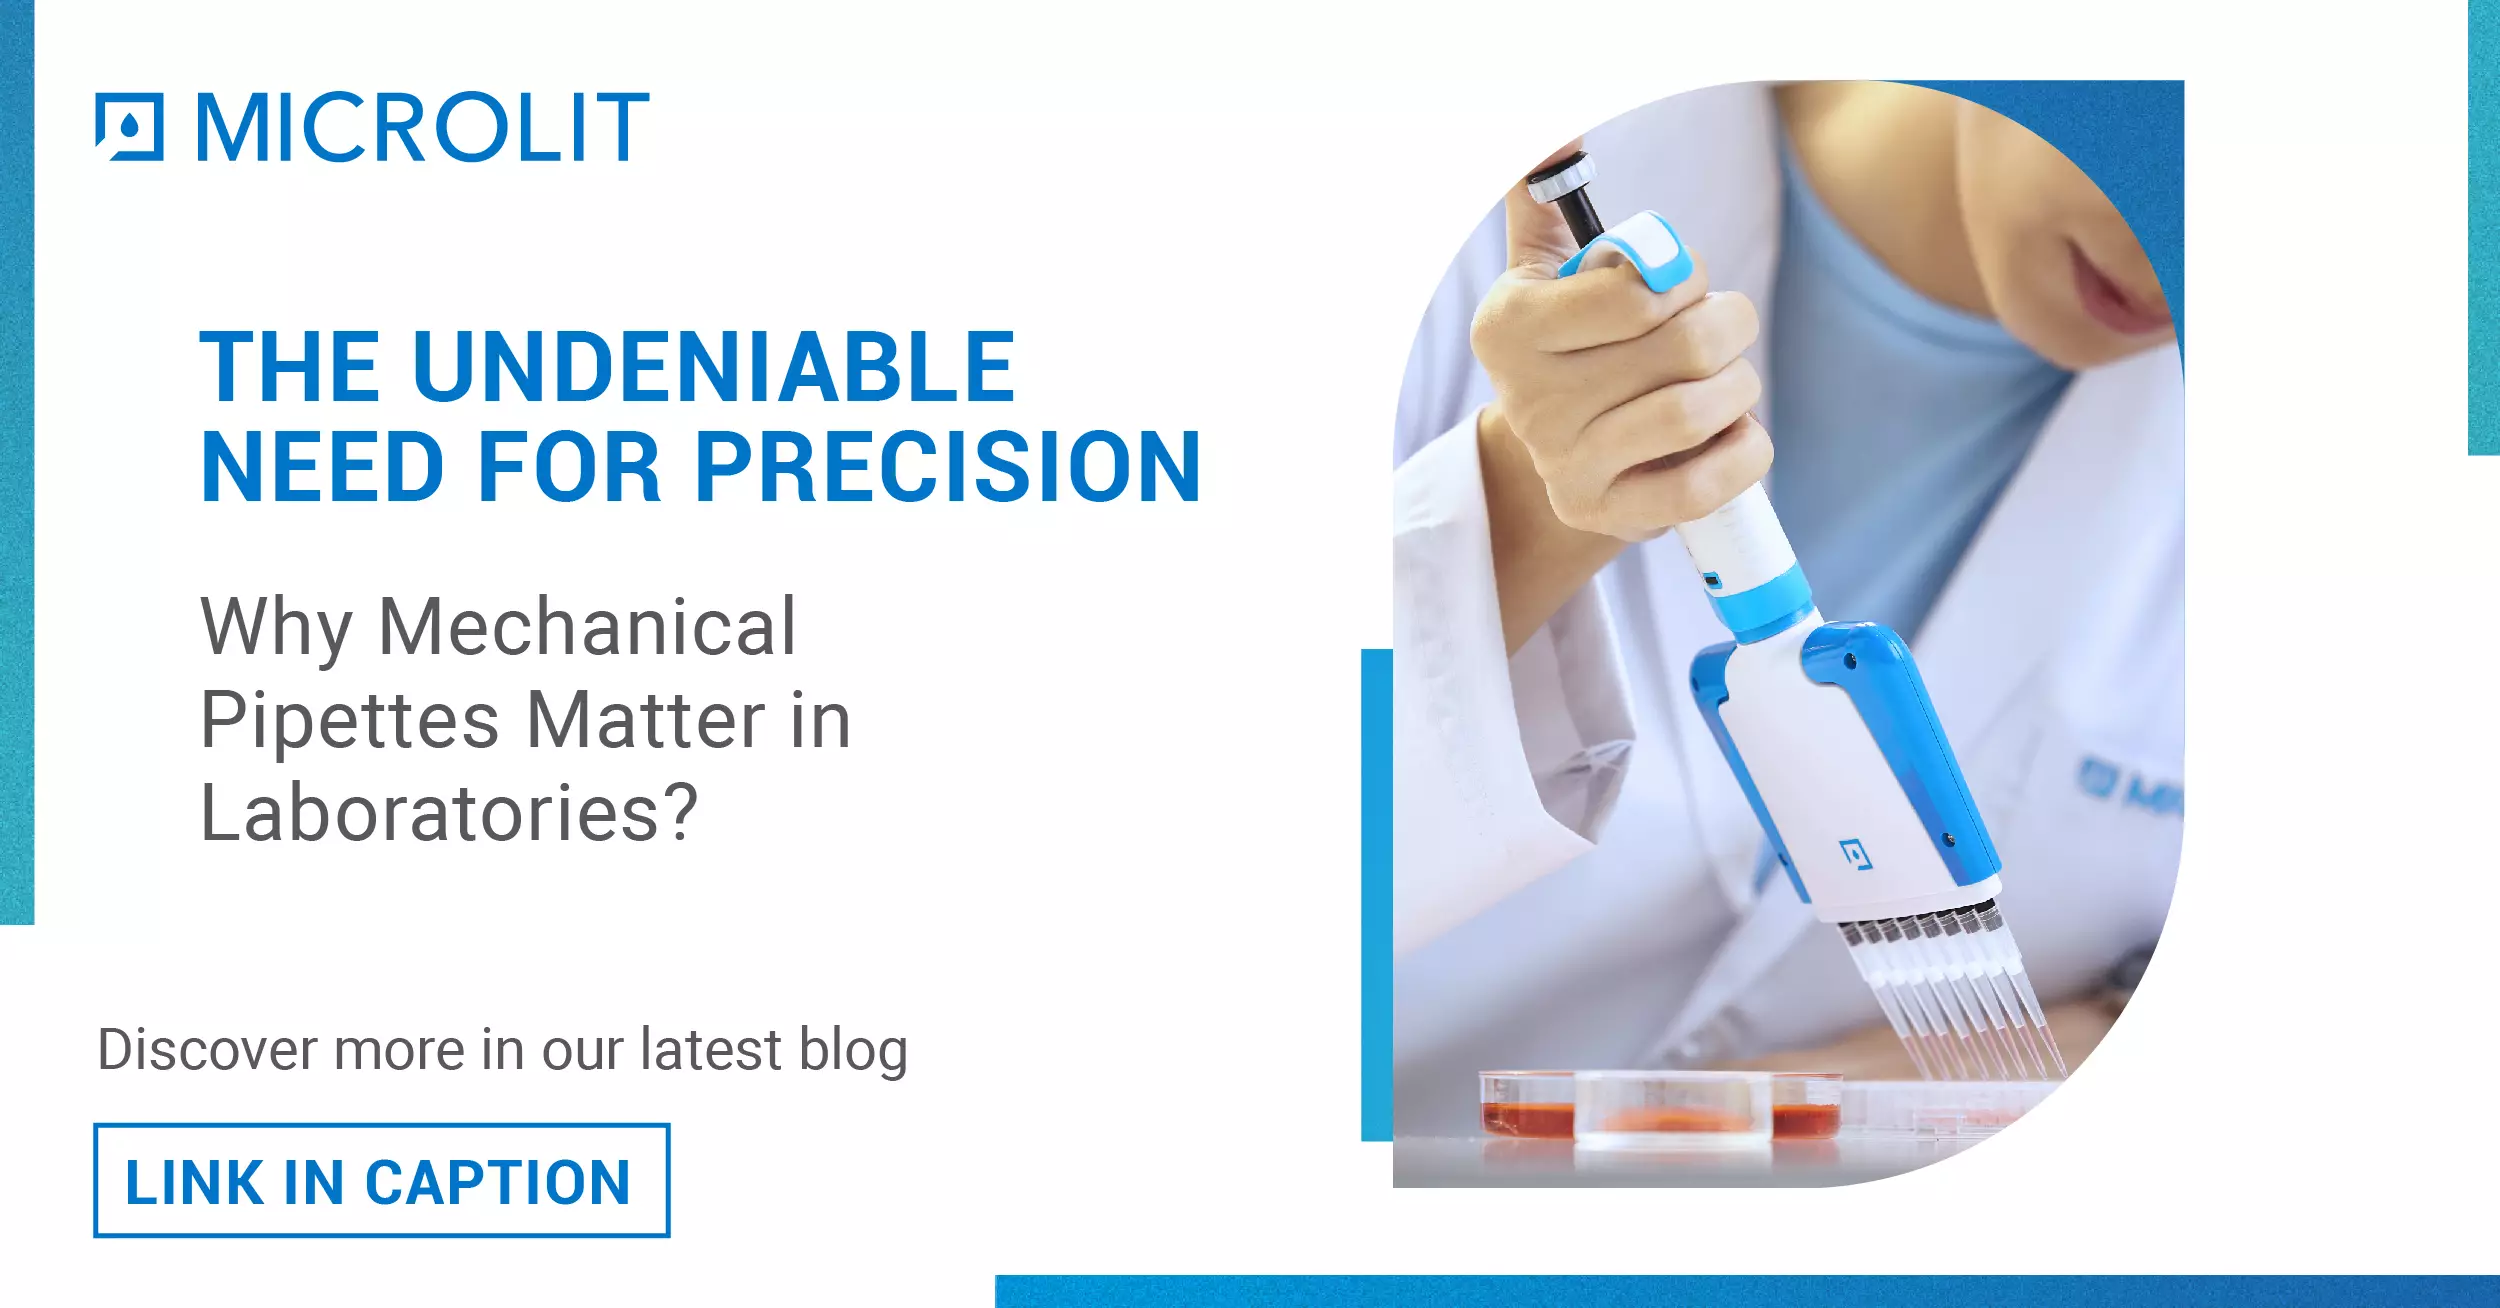 The Undeniable Need for Precision: Why Mechanical Pipettes Matter in Laboratories?